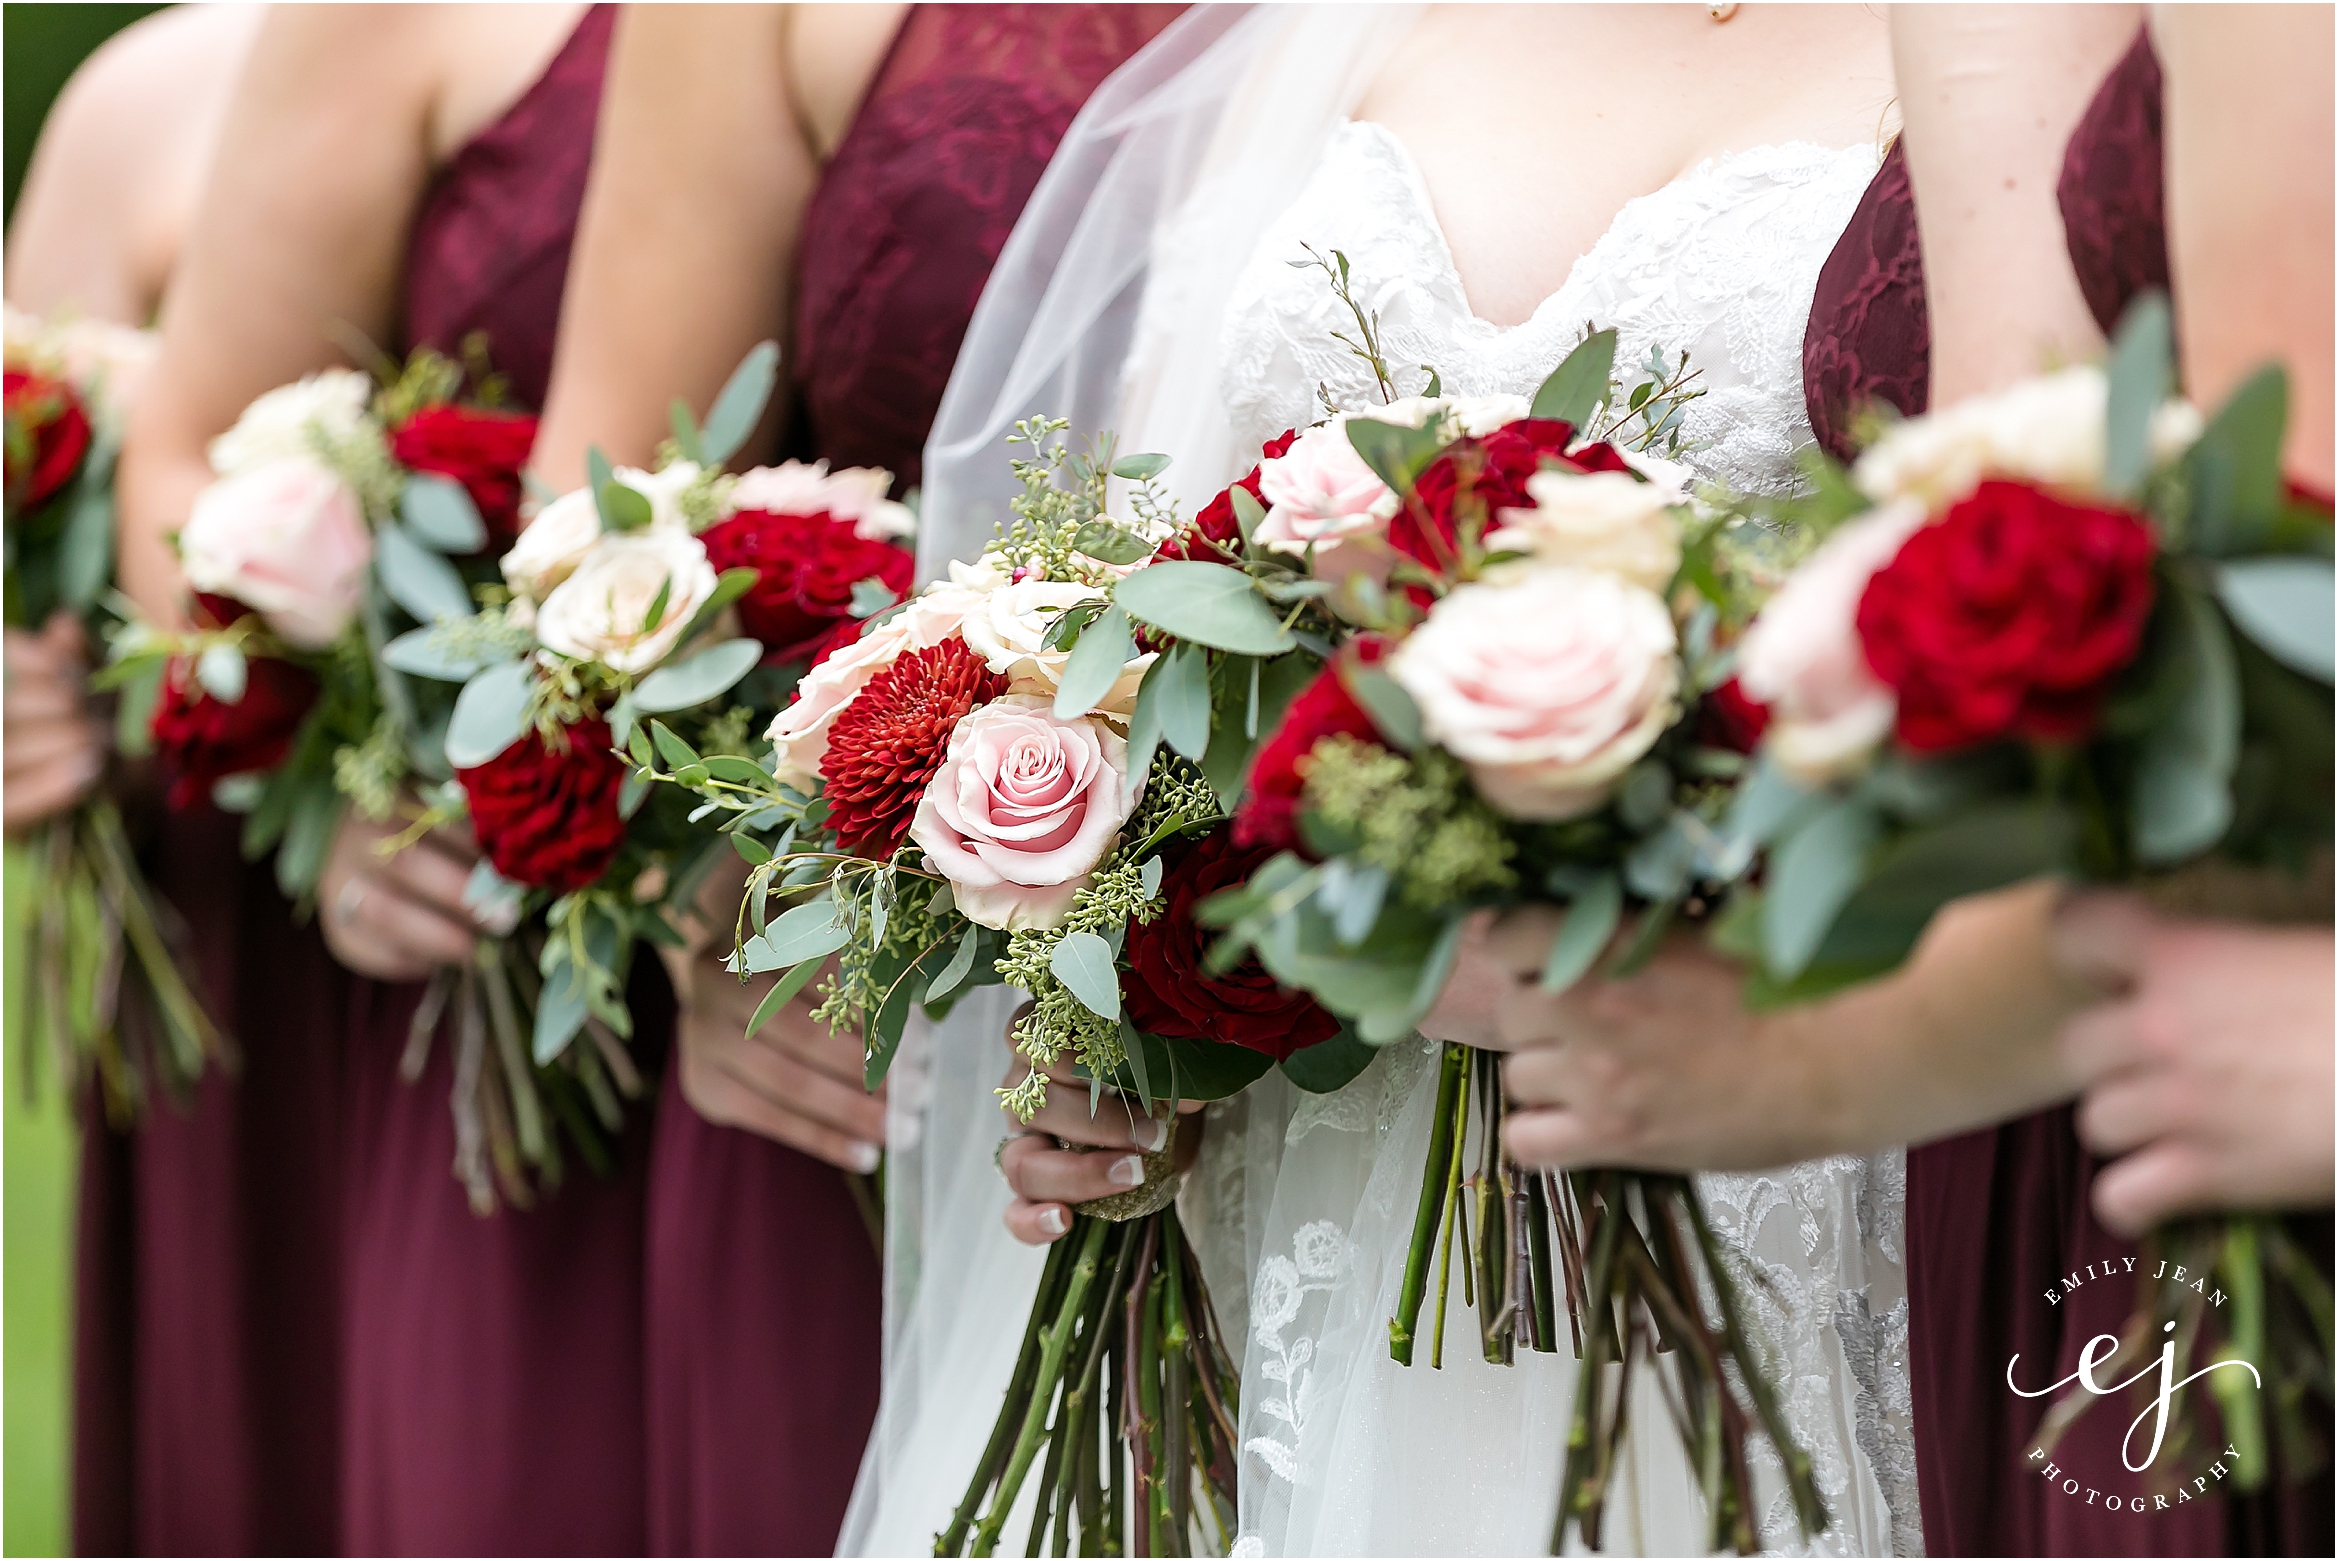 red wine bridesmaid dresses with pink and red bouquets at winnebago springs wedding venue minnesota